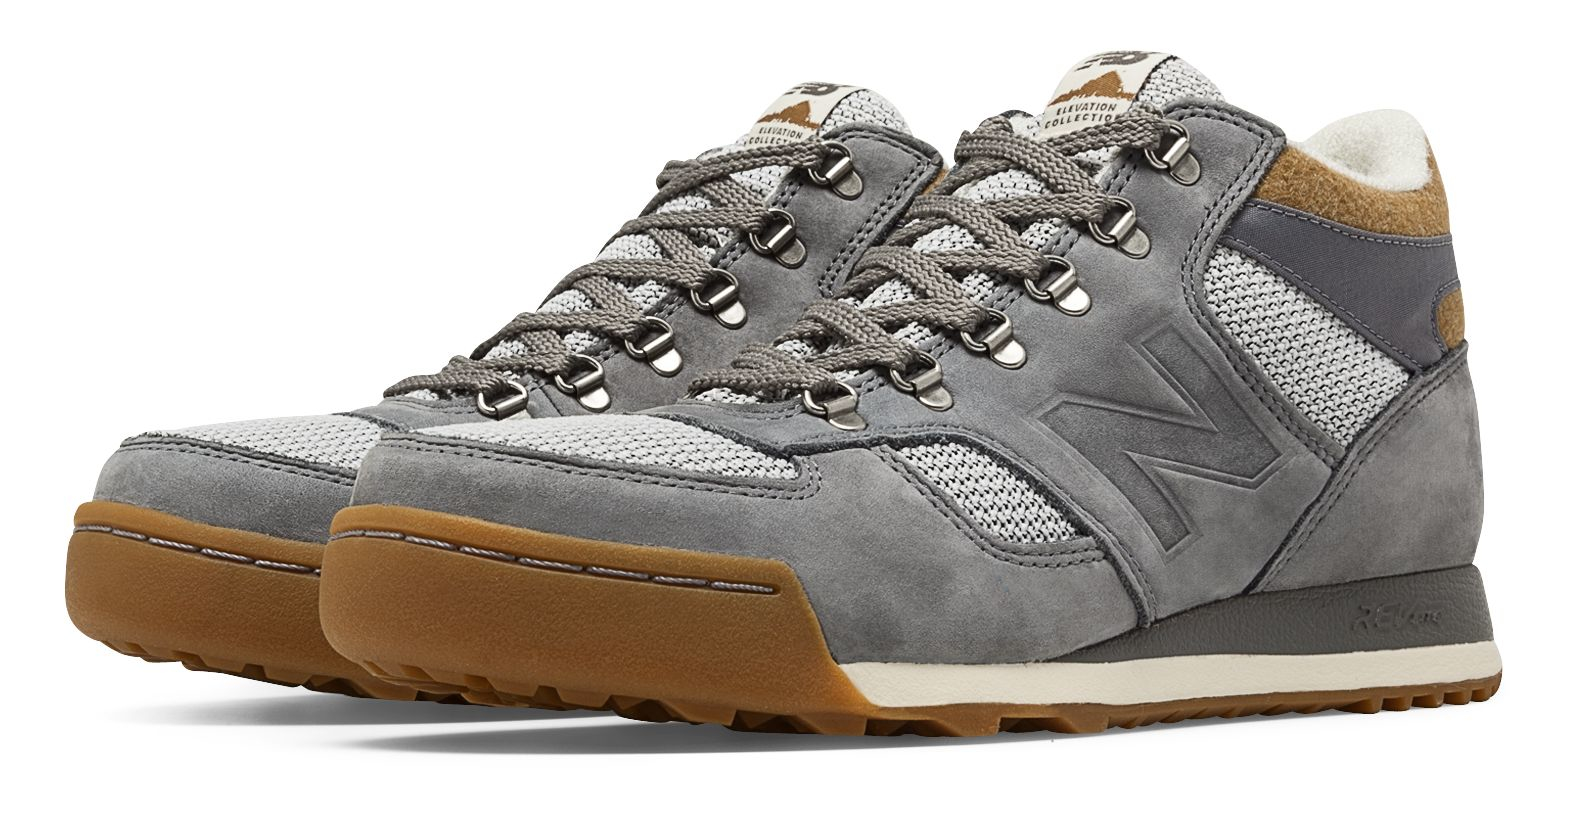 New Balance 710 Outdoor Suede in Brown for Men - Lyst